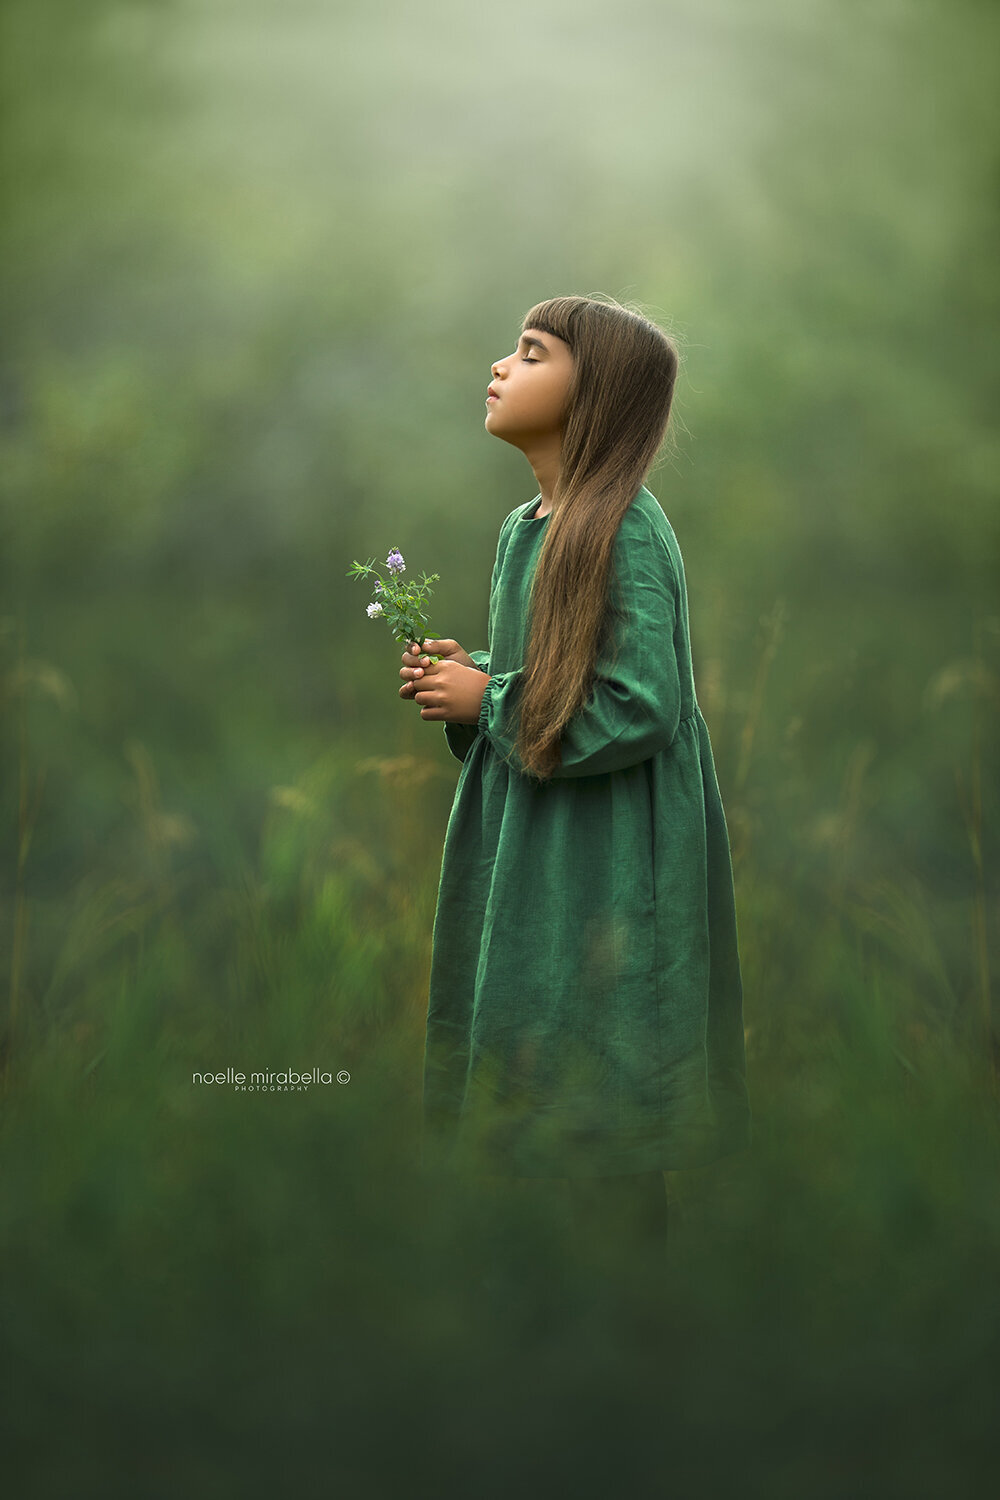 Girl Standing in nature with peaceful expression.